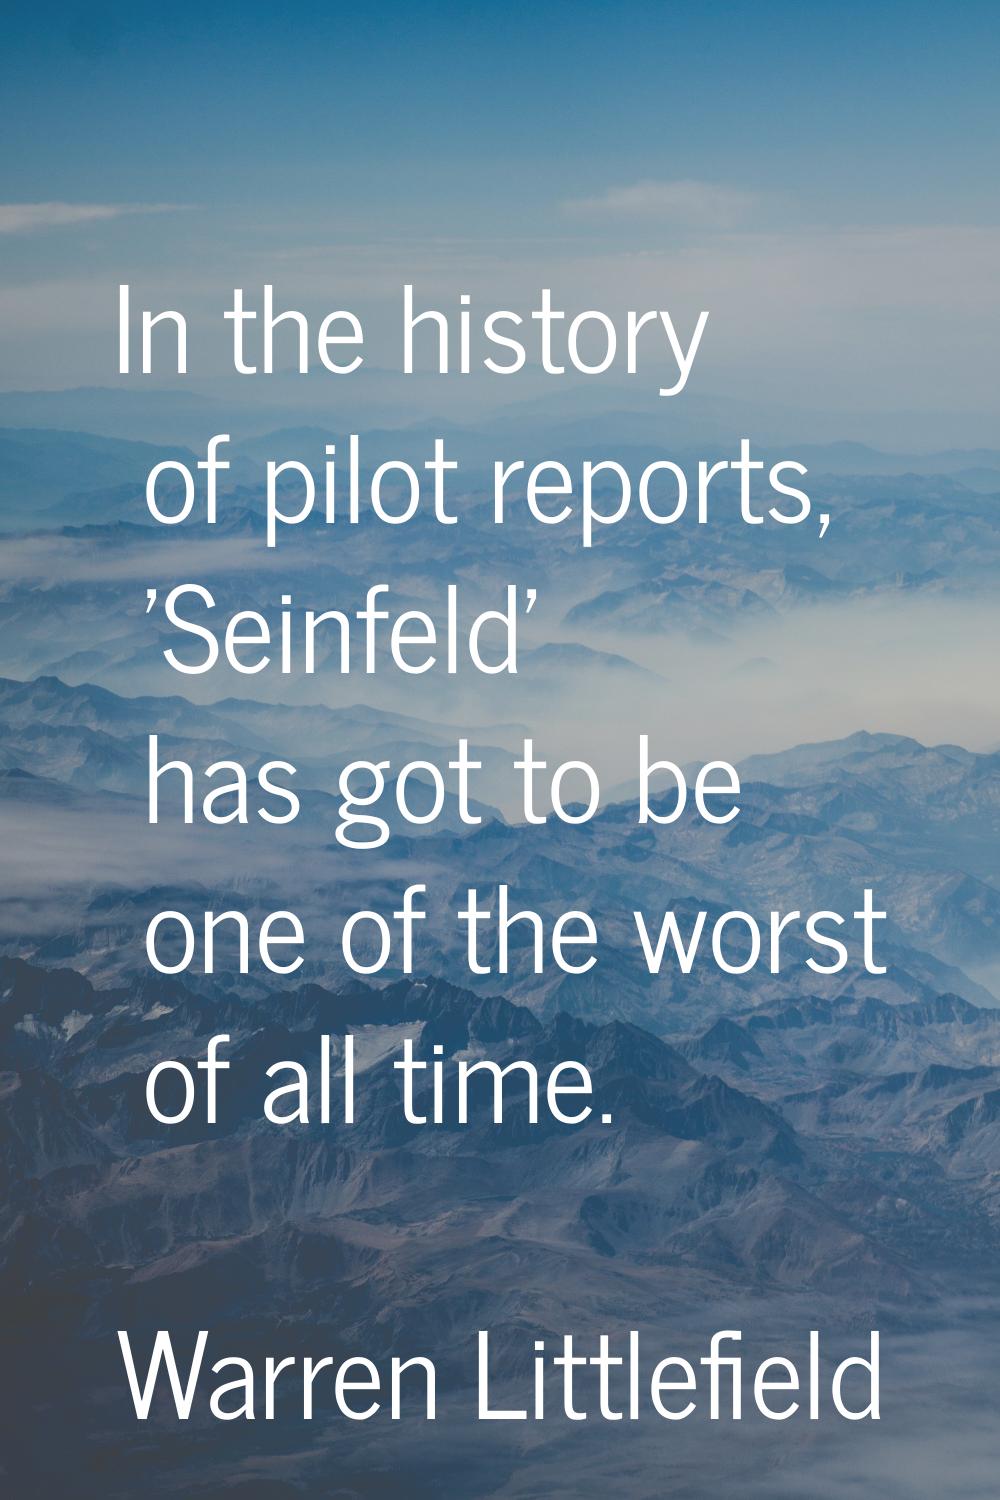 In the history of pilot reports, 'Seinfeld' has got to be one of the worst of all time.